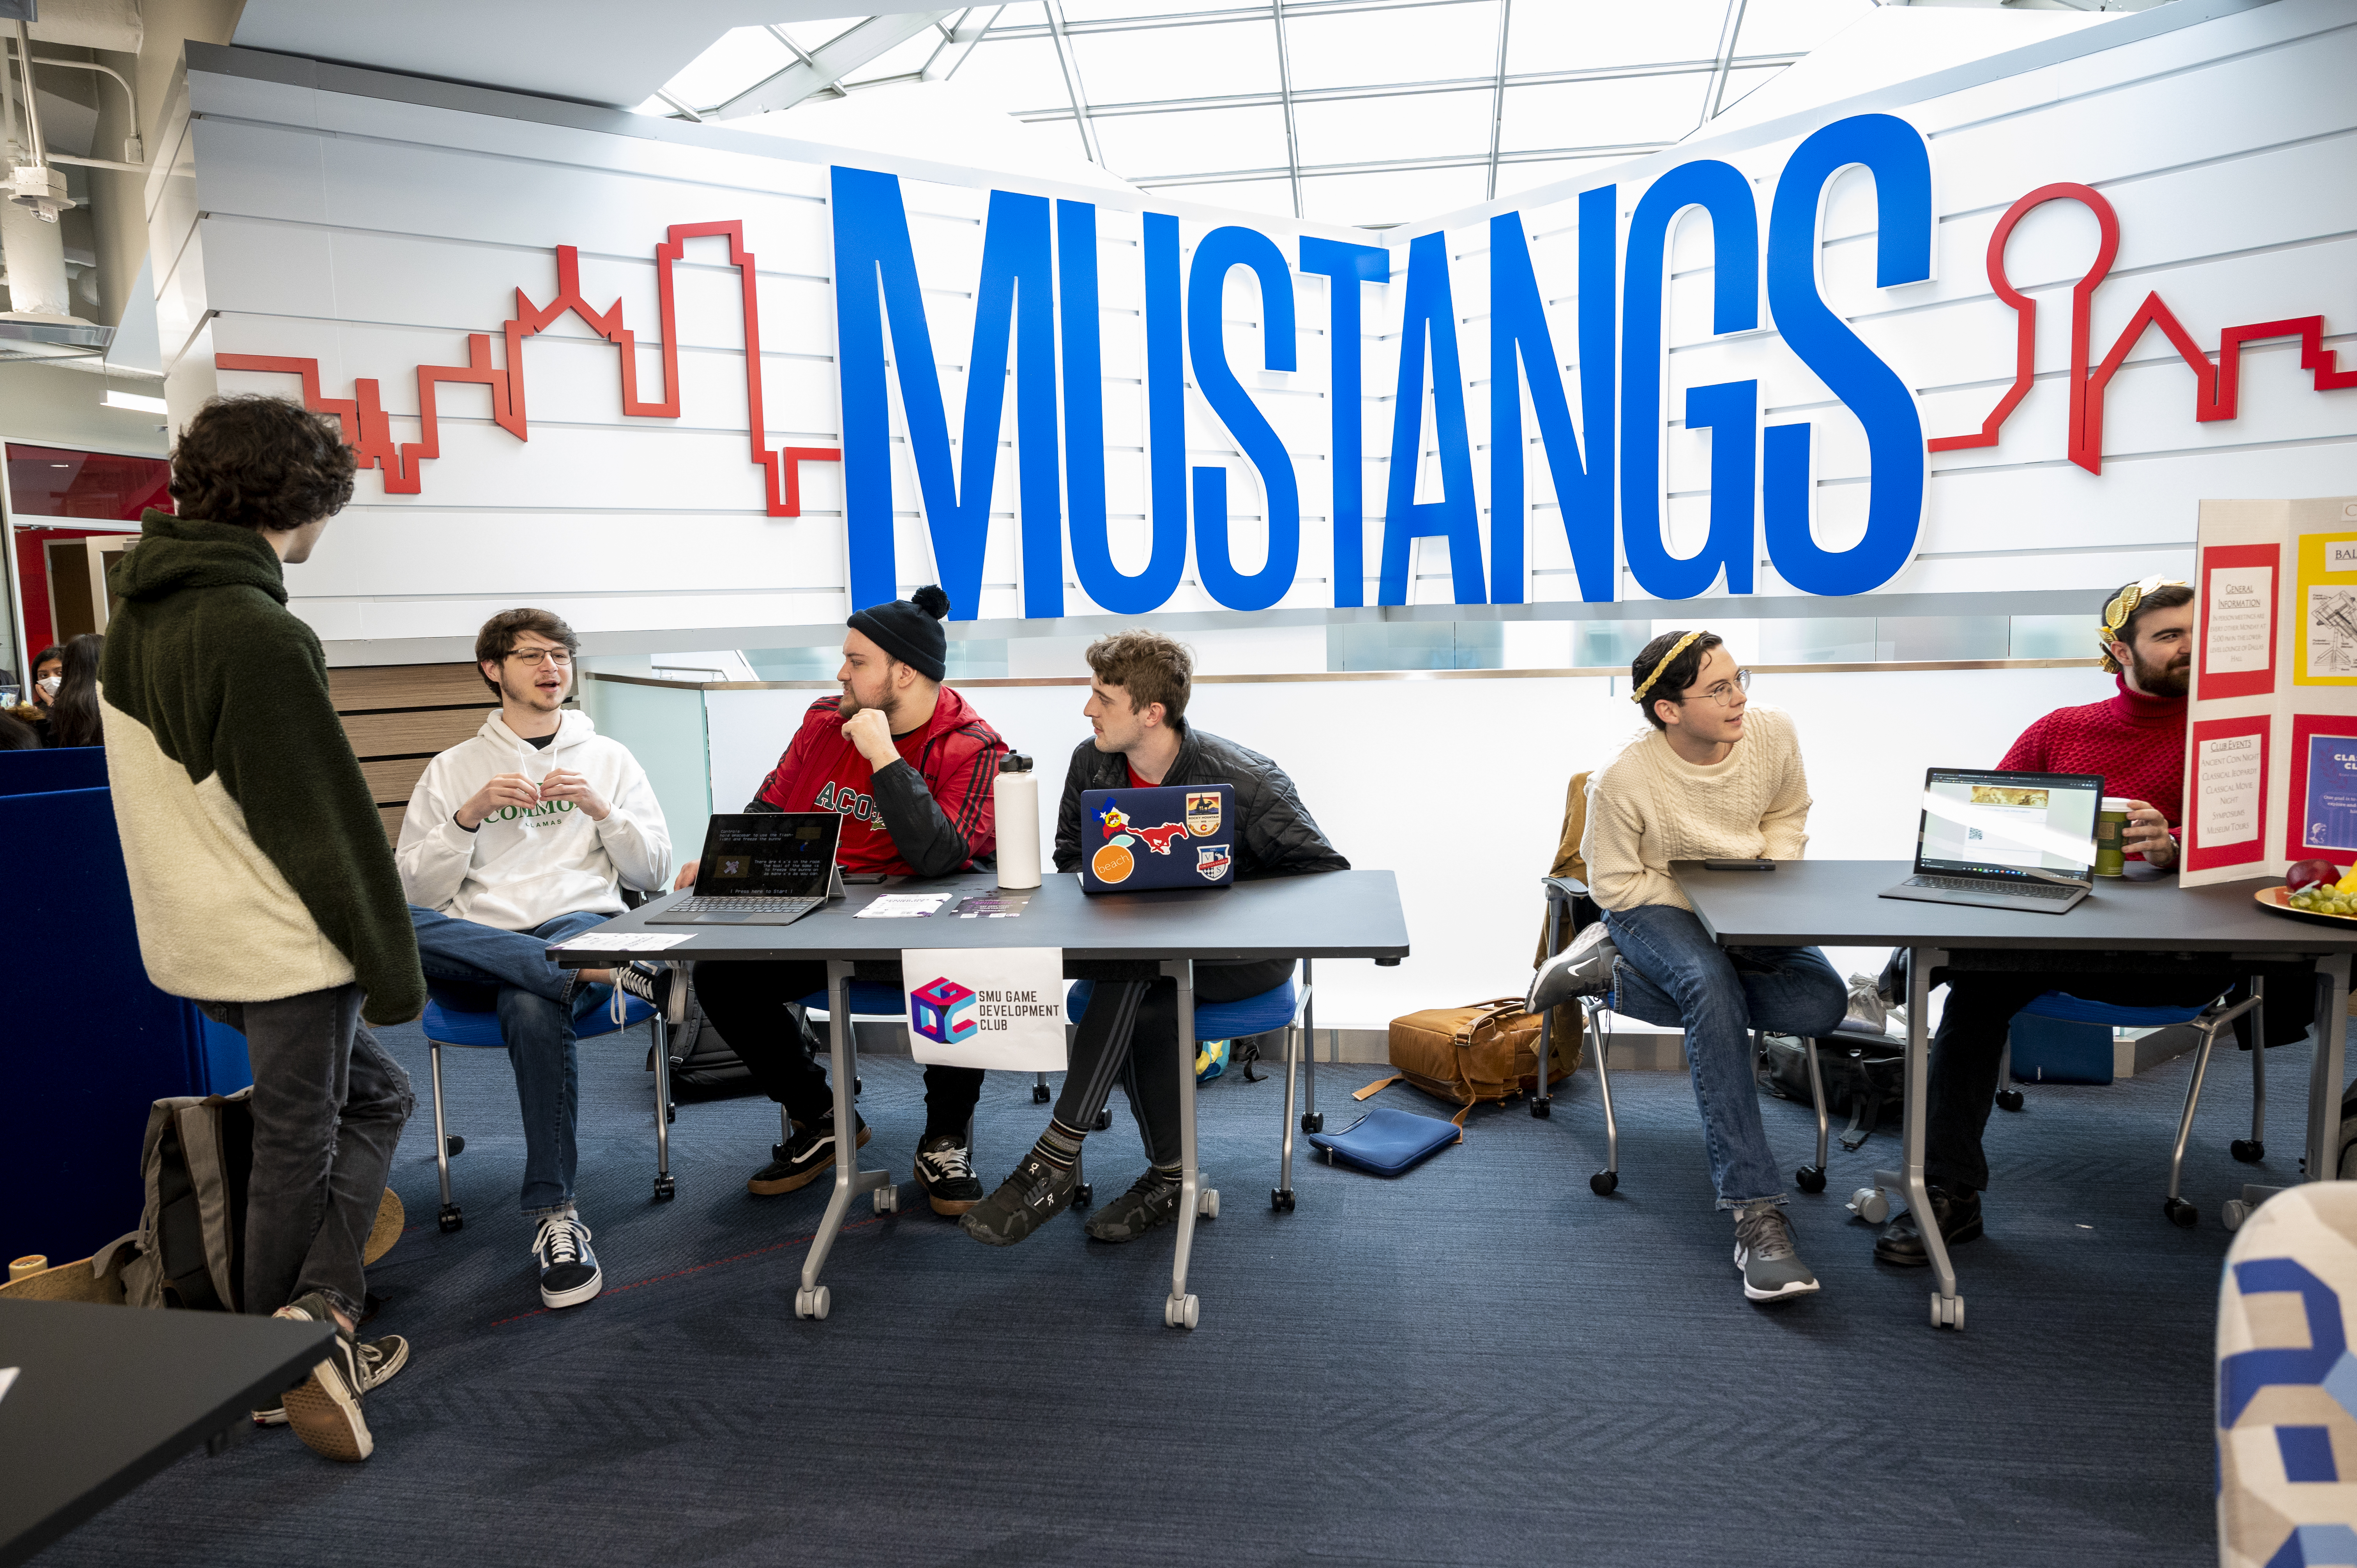 4 students sit around a table and 2 students sit around another table. Large blue letters spelling MUSTANGS along with a red outline of the Dallas skyline is in the background of the tables.